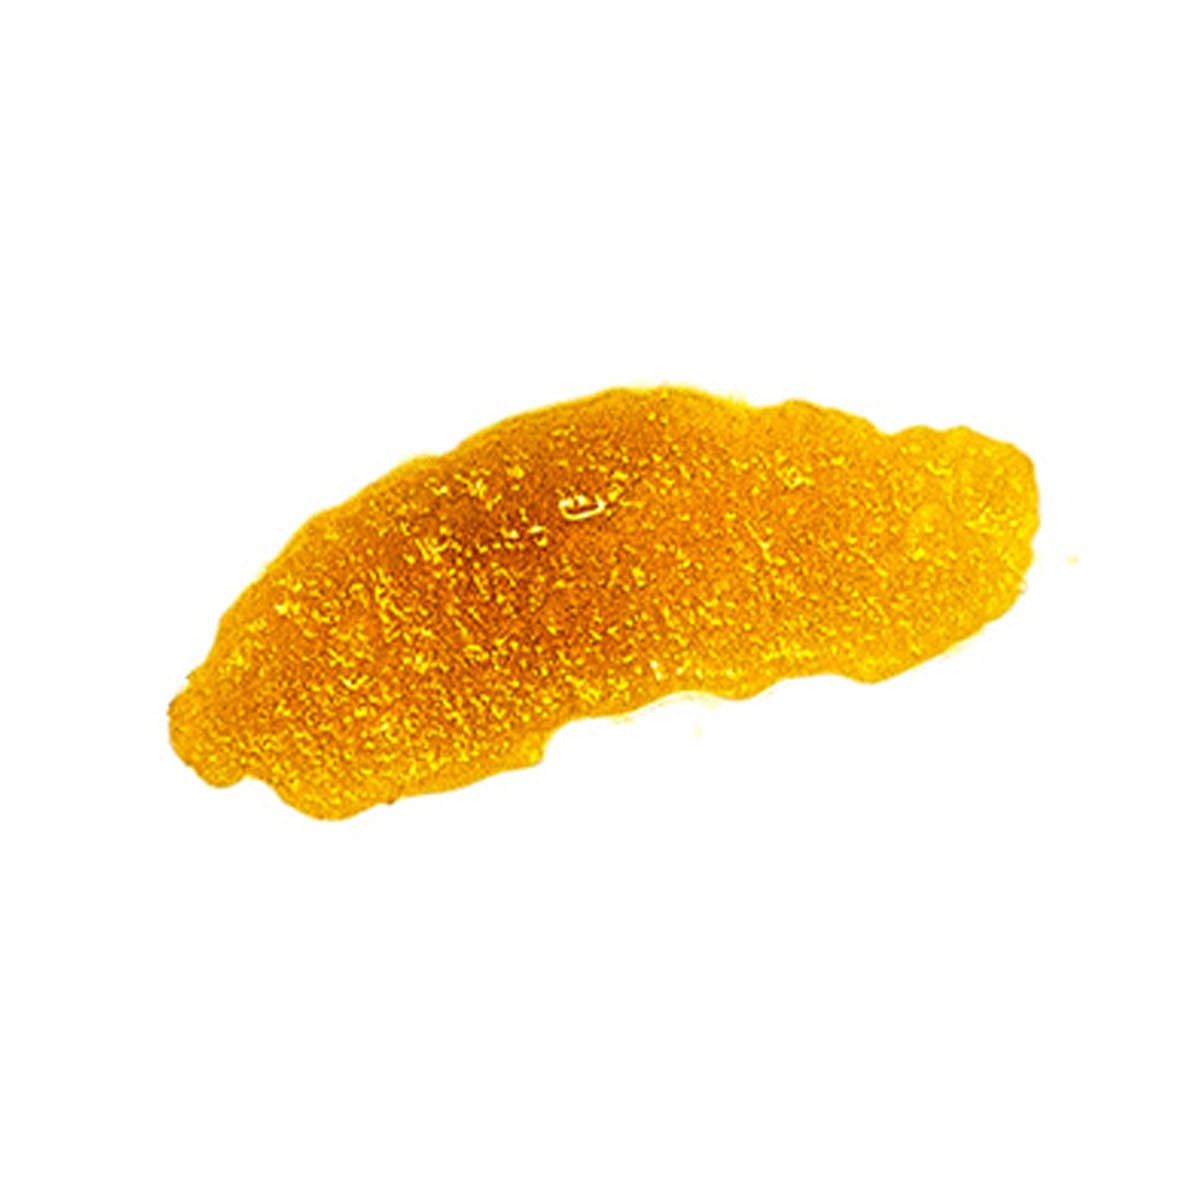 concentrate-loudpack-loudpack-live-resin-pure-og-x-star-dawg